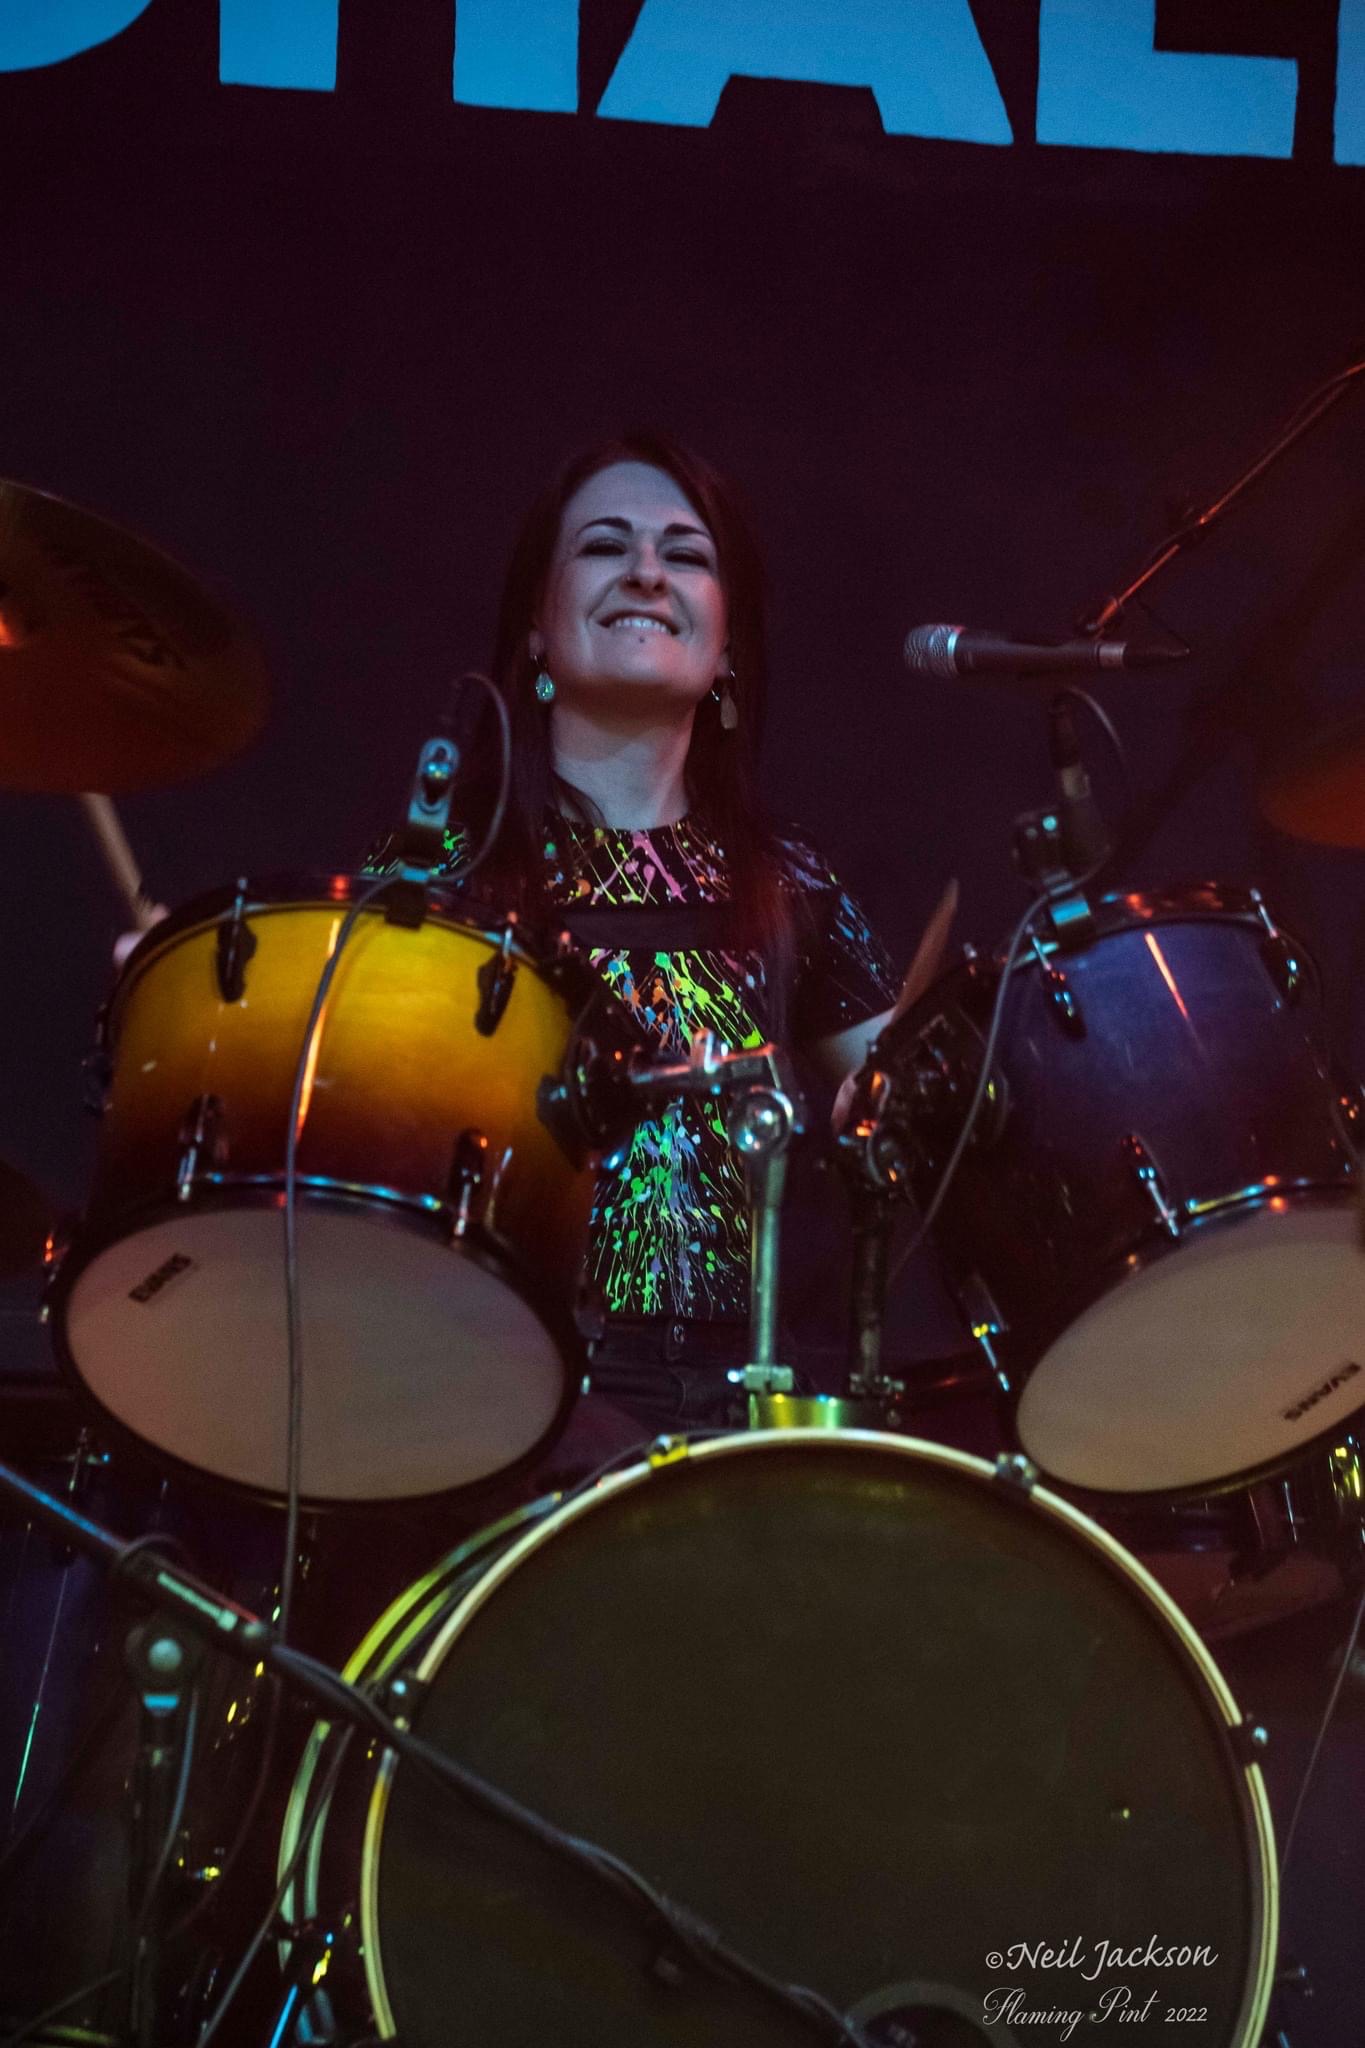 Emma Limn - Drummer for 50 Year Storm